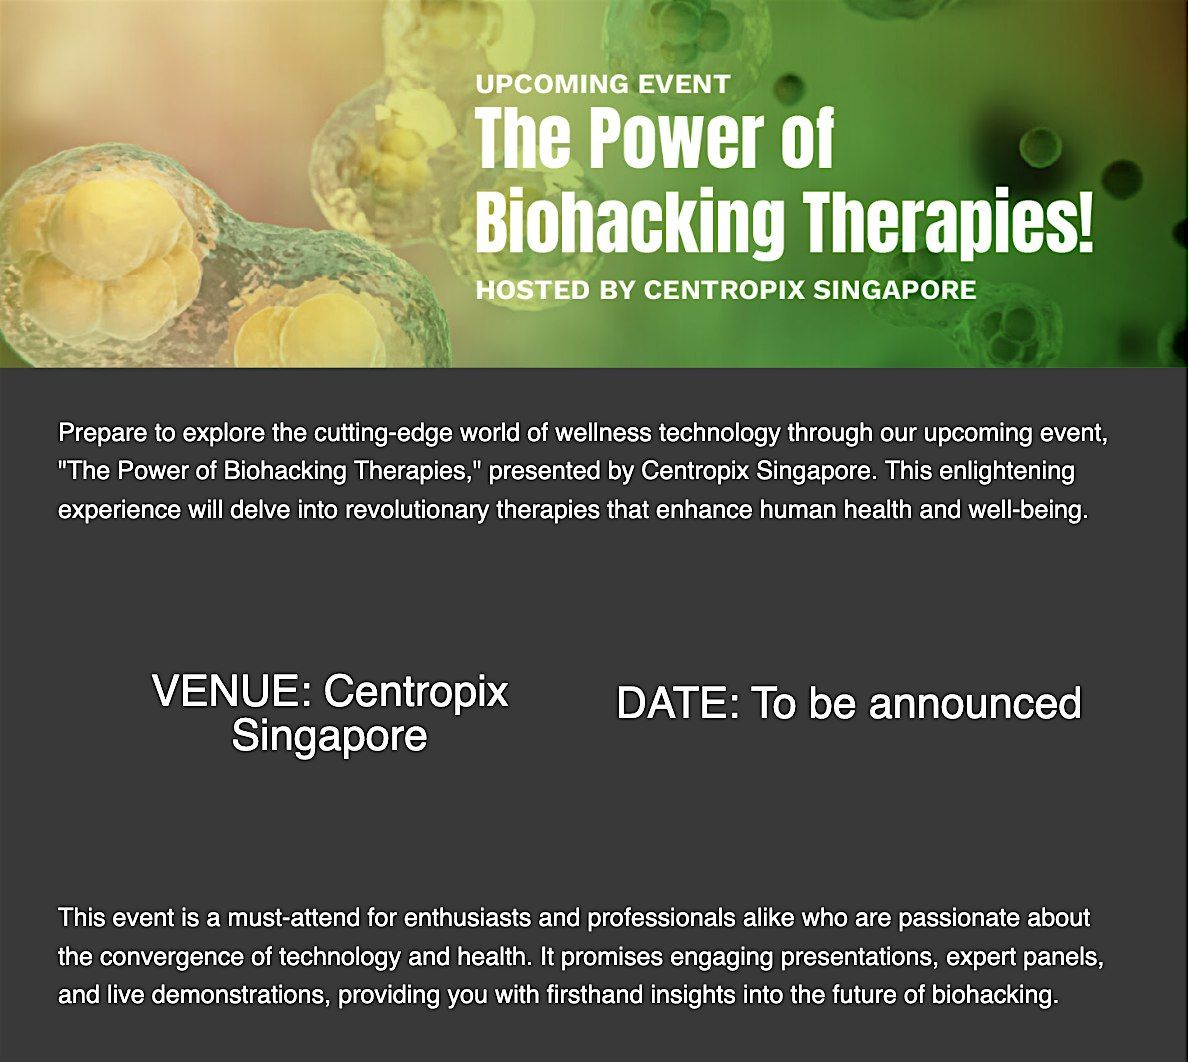 The Power of Biohacking Therapies